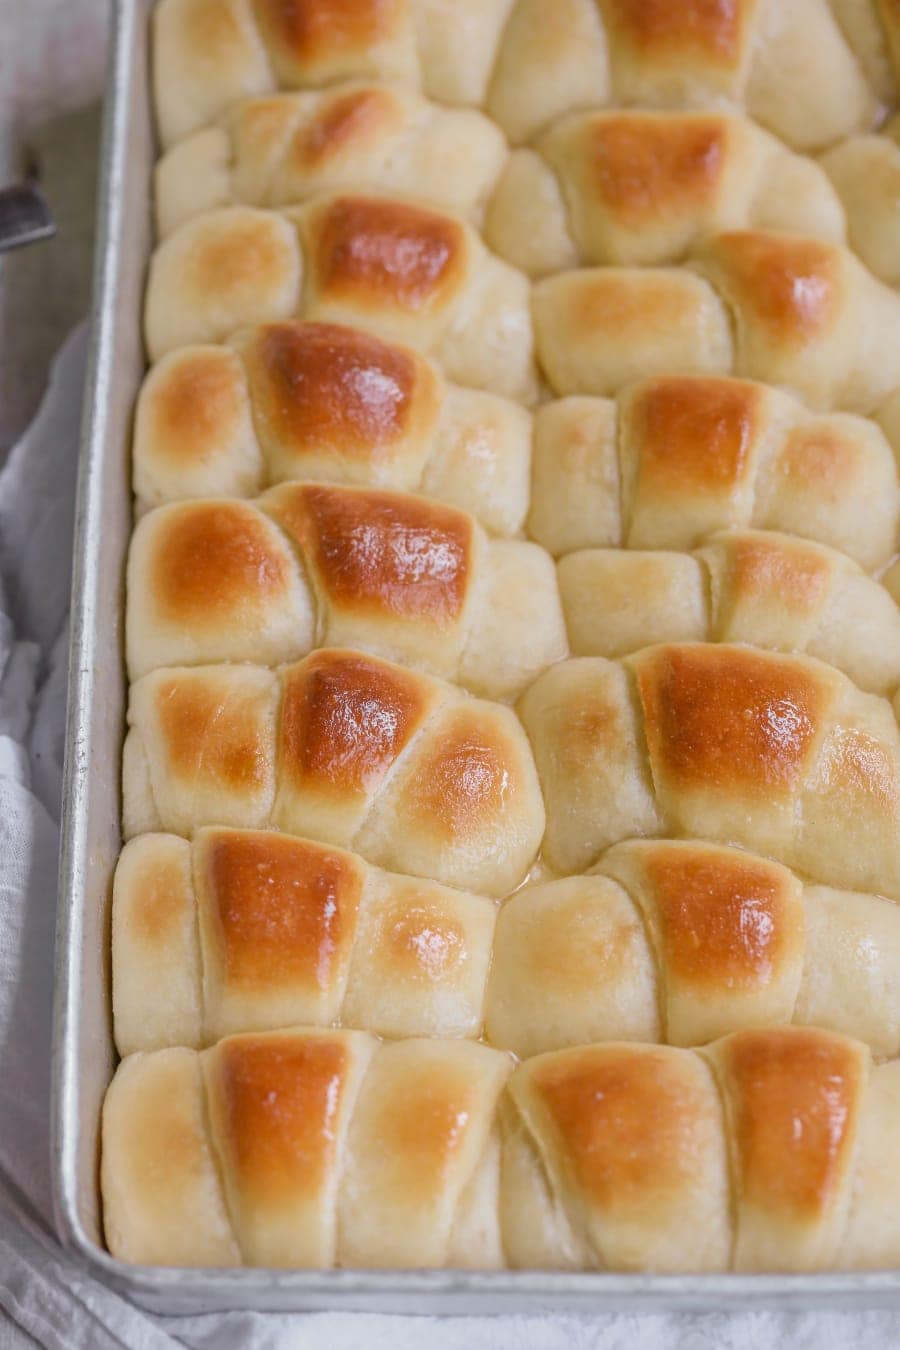 Baked and buttered homemade dinner rolls in a baking pan.